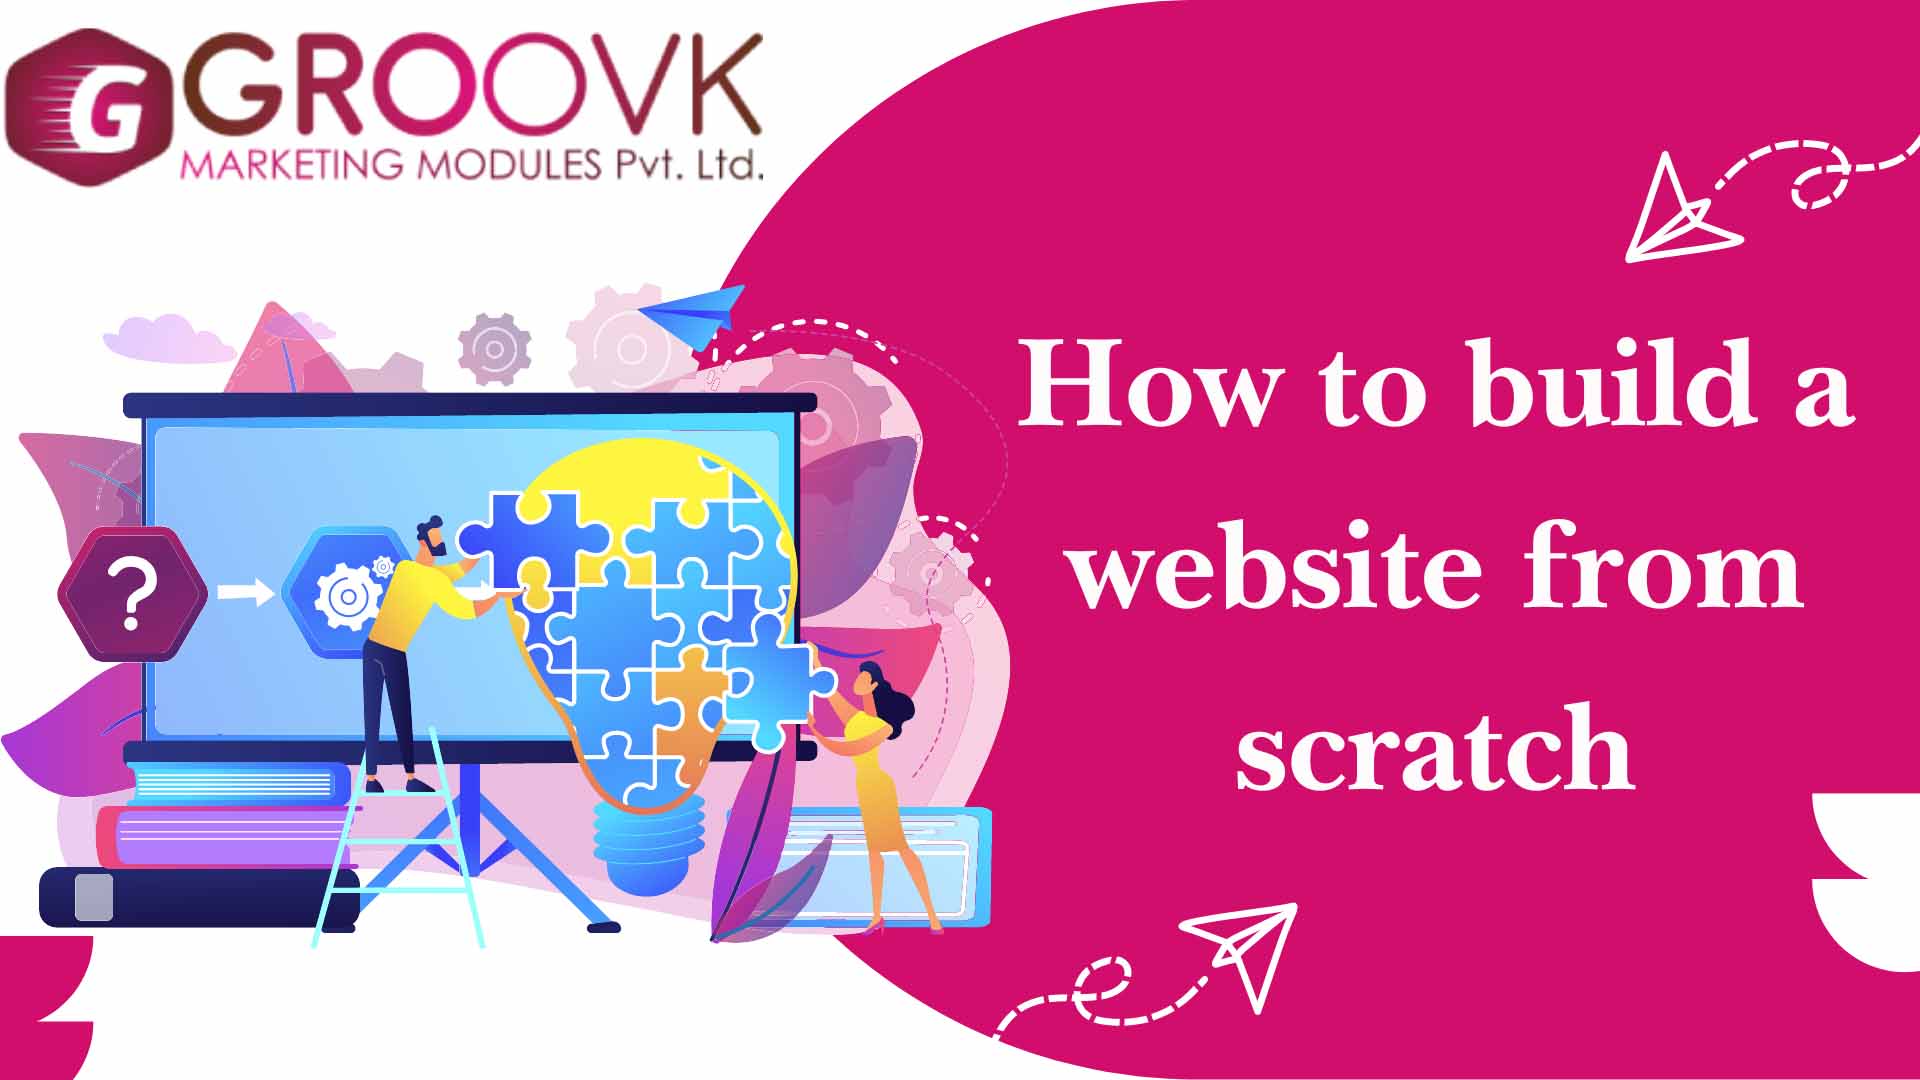 A Step-by-Step Guide to Build a Website from Scratch